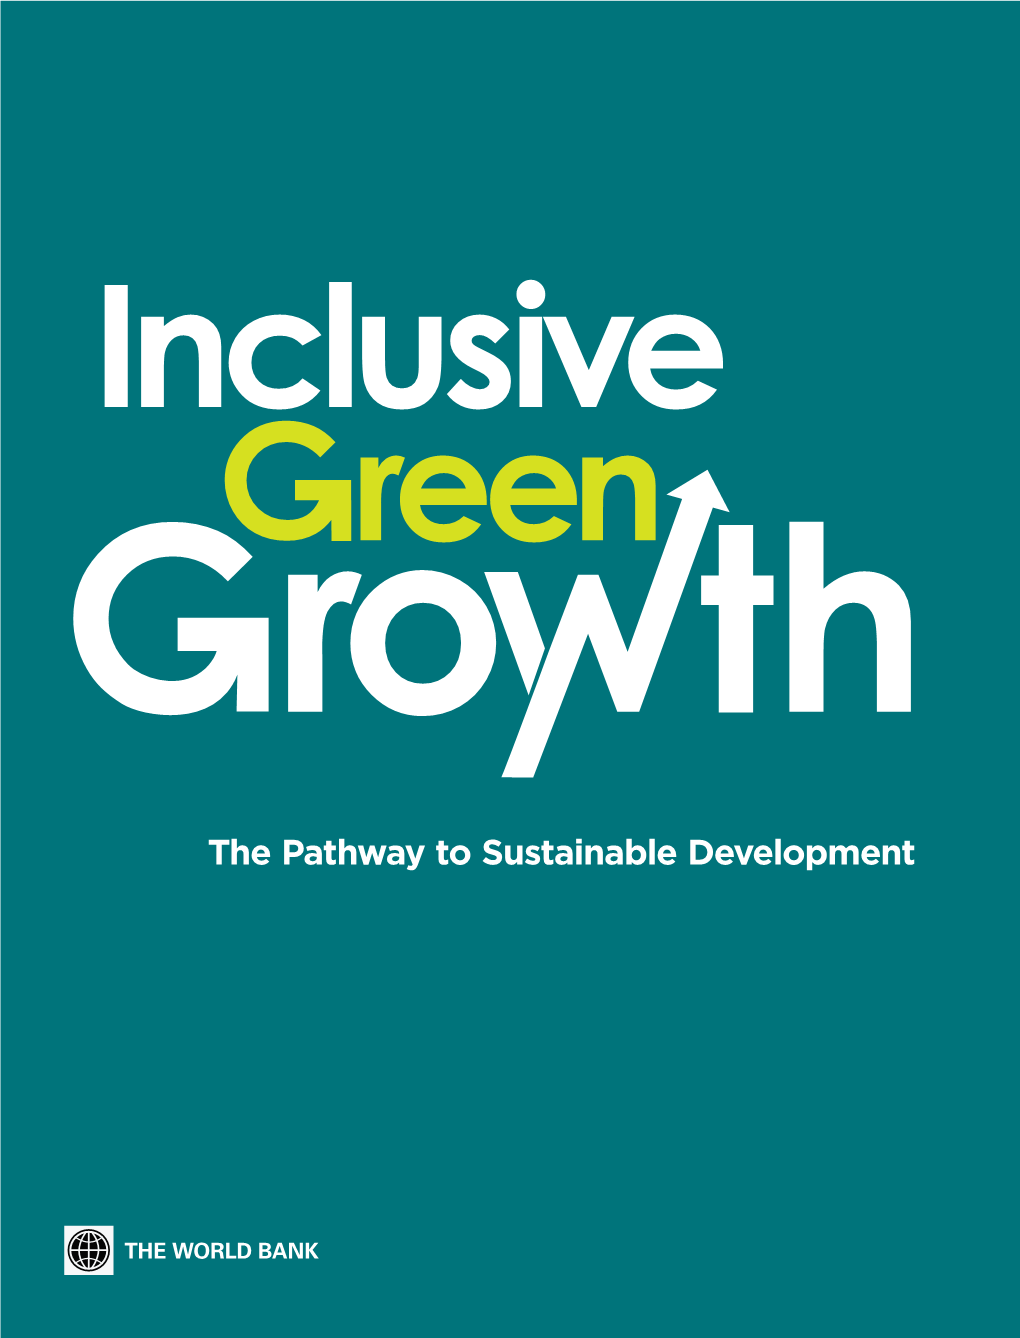 The Pathway to Sustainable Development